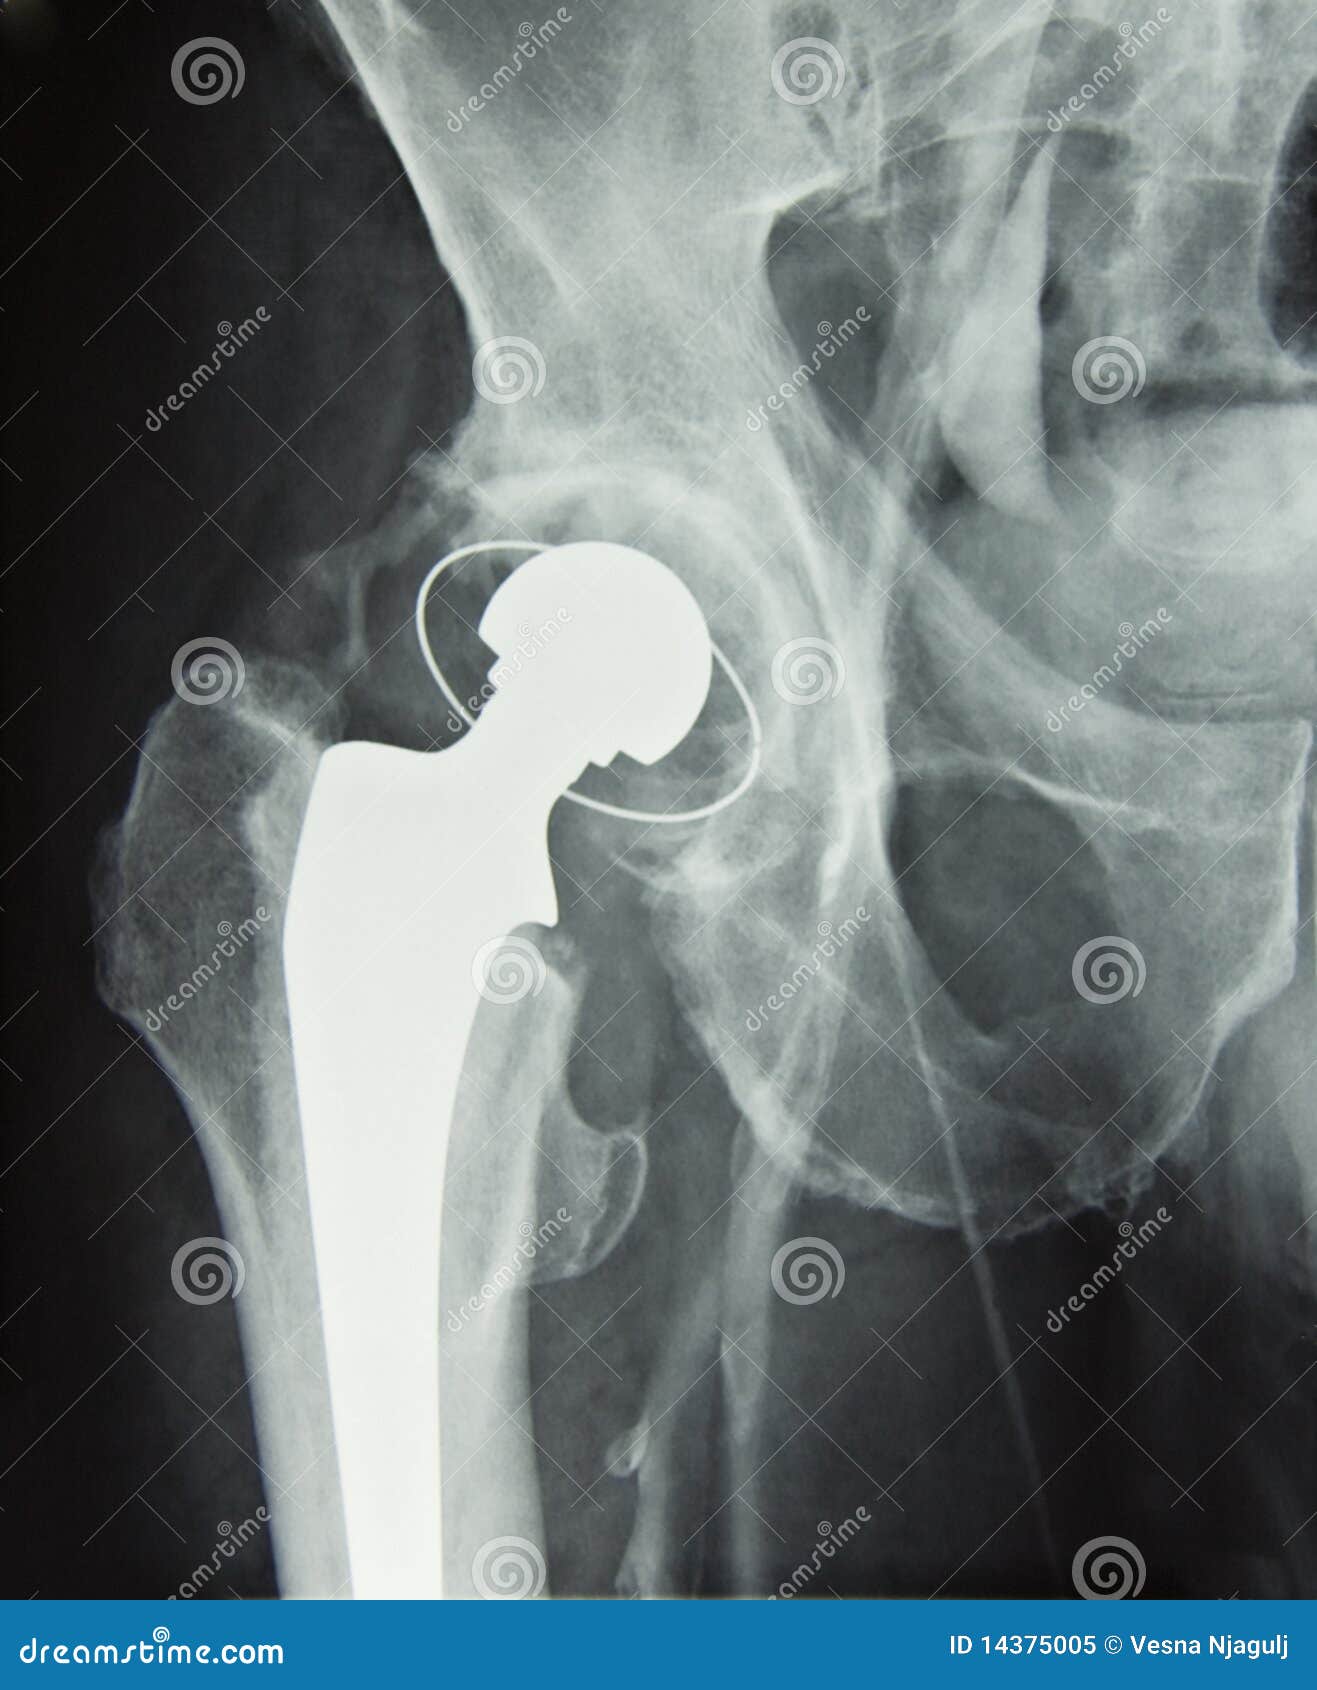 hip prosthesis implant, hip replacement